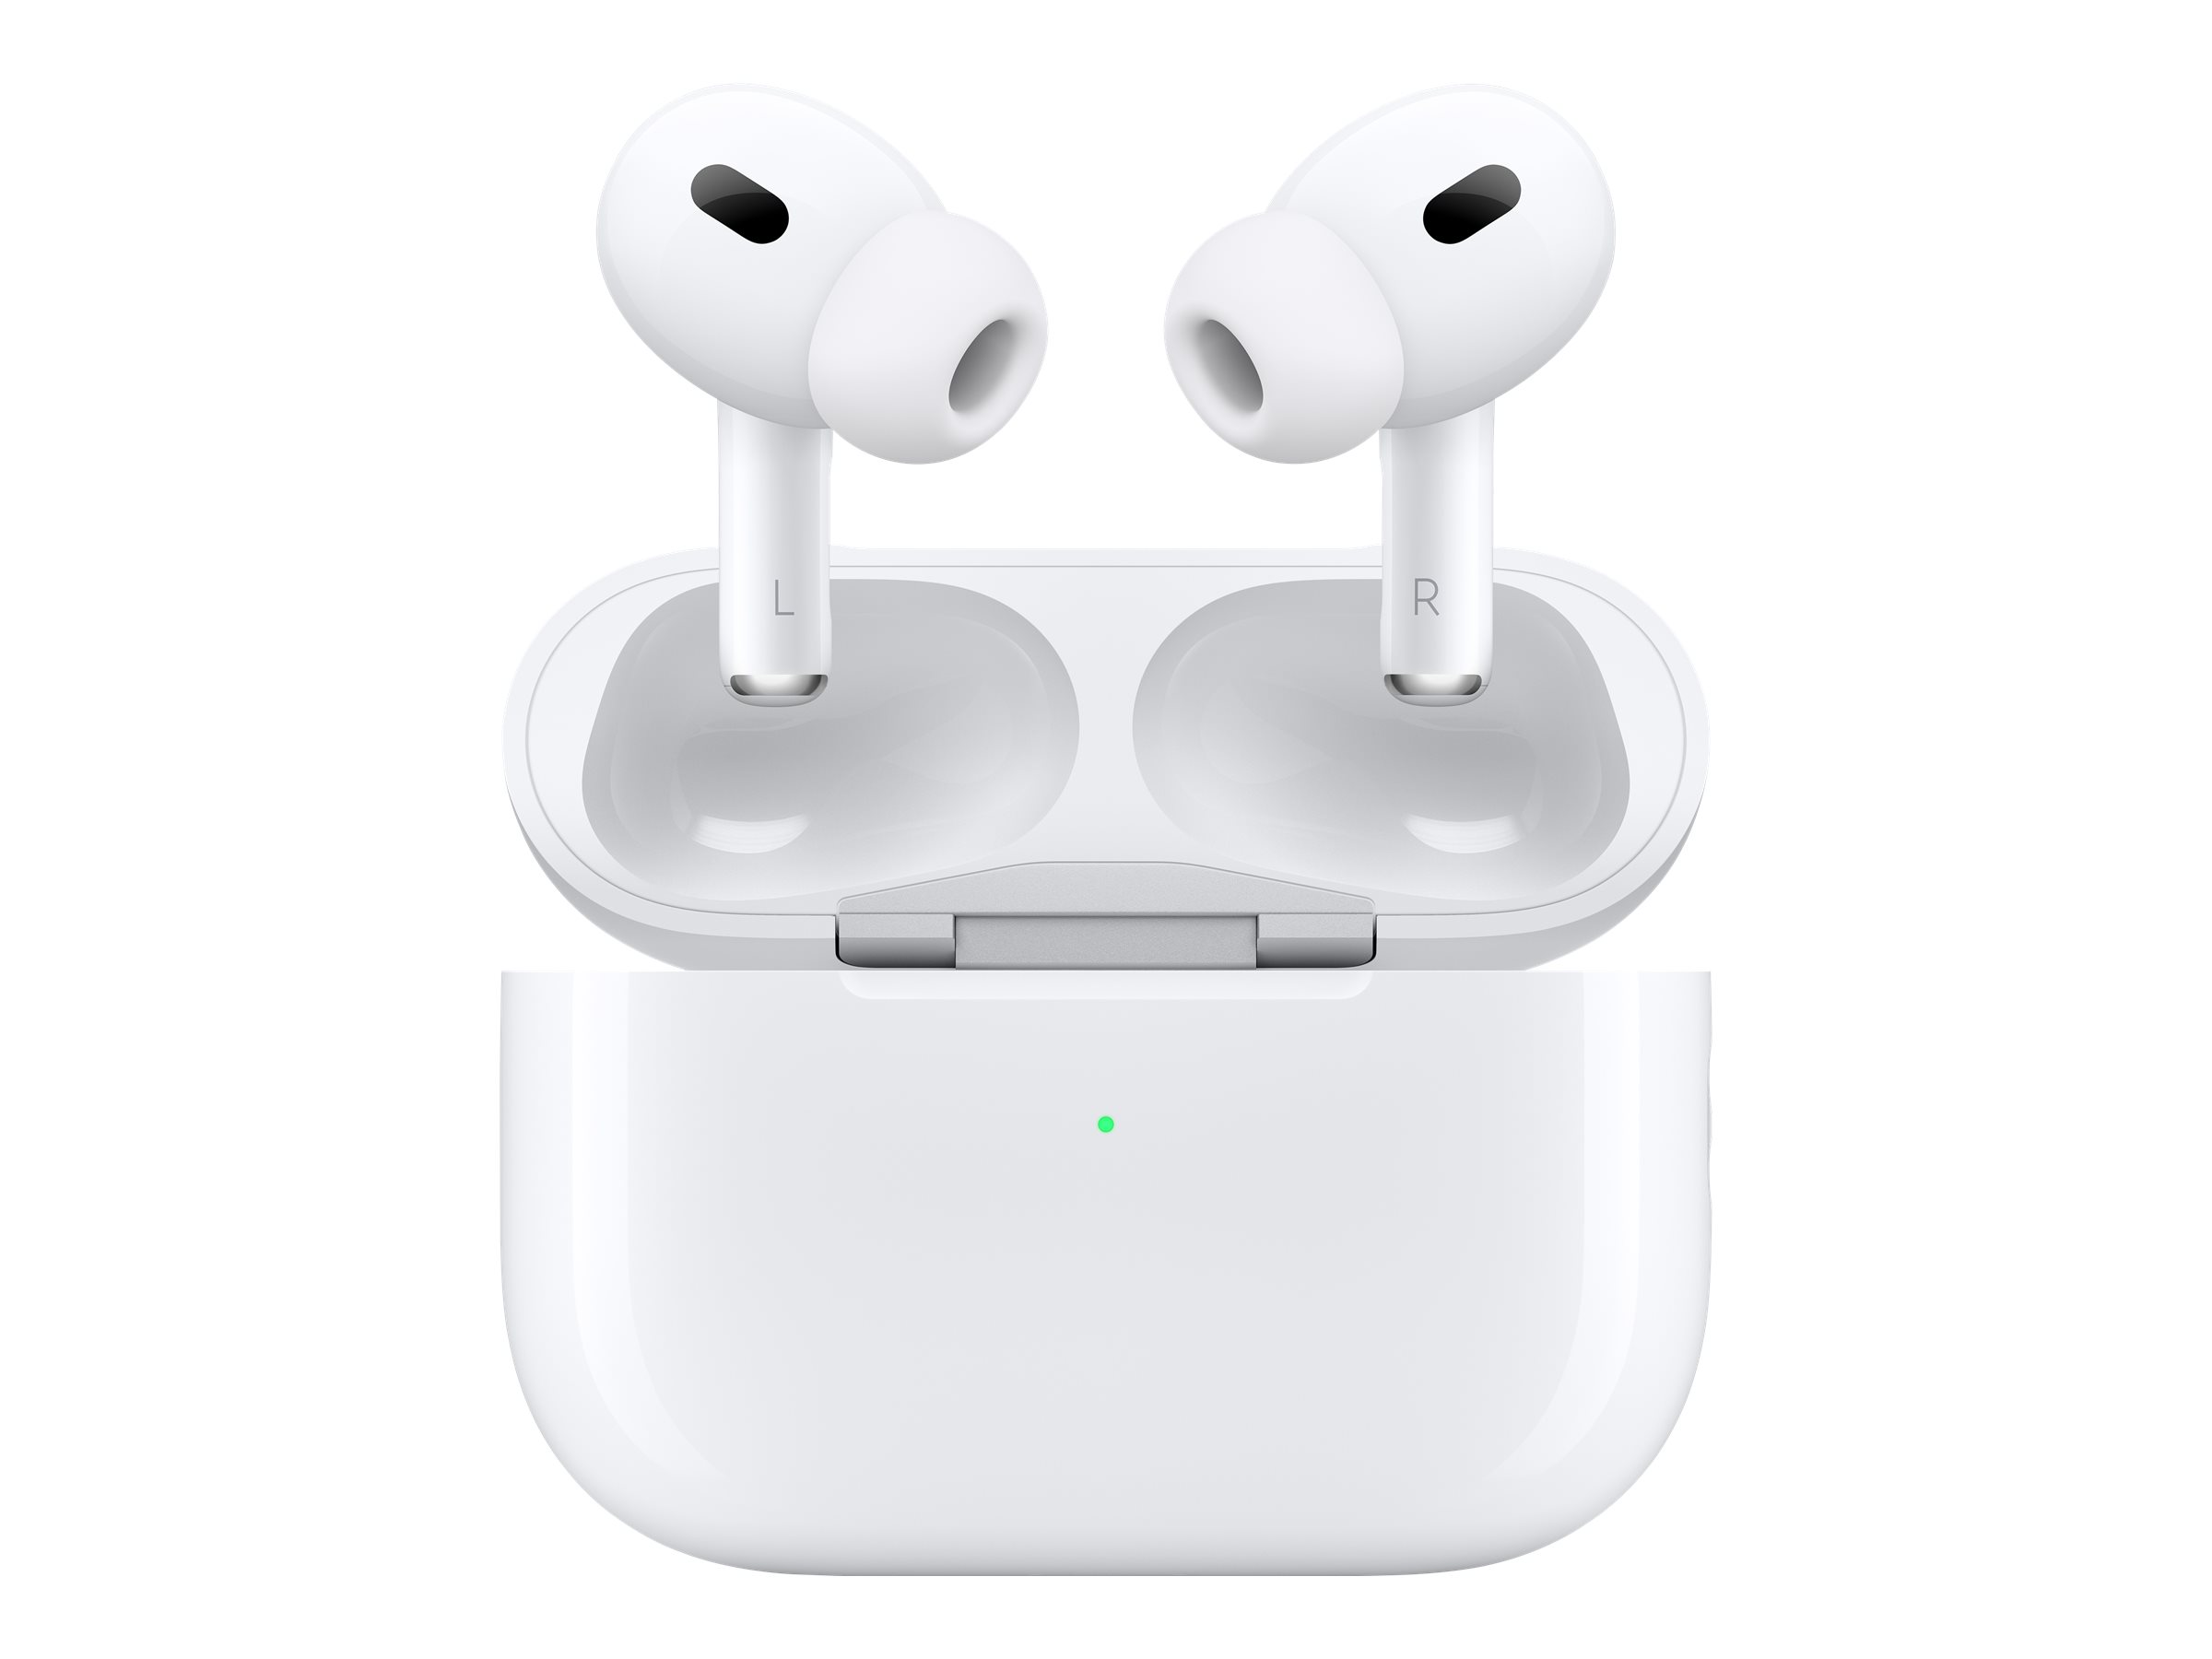 JBL Reflect Aero vs. Apple AirPods Pro (2nd generation): comparison and  differences?